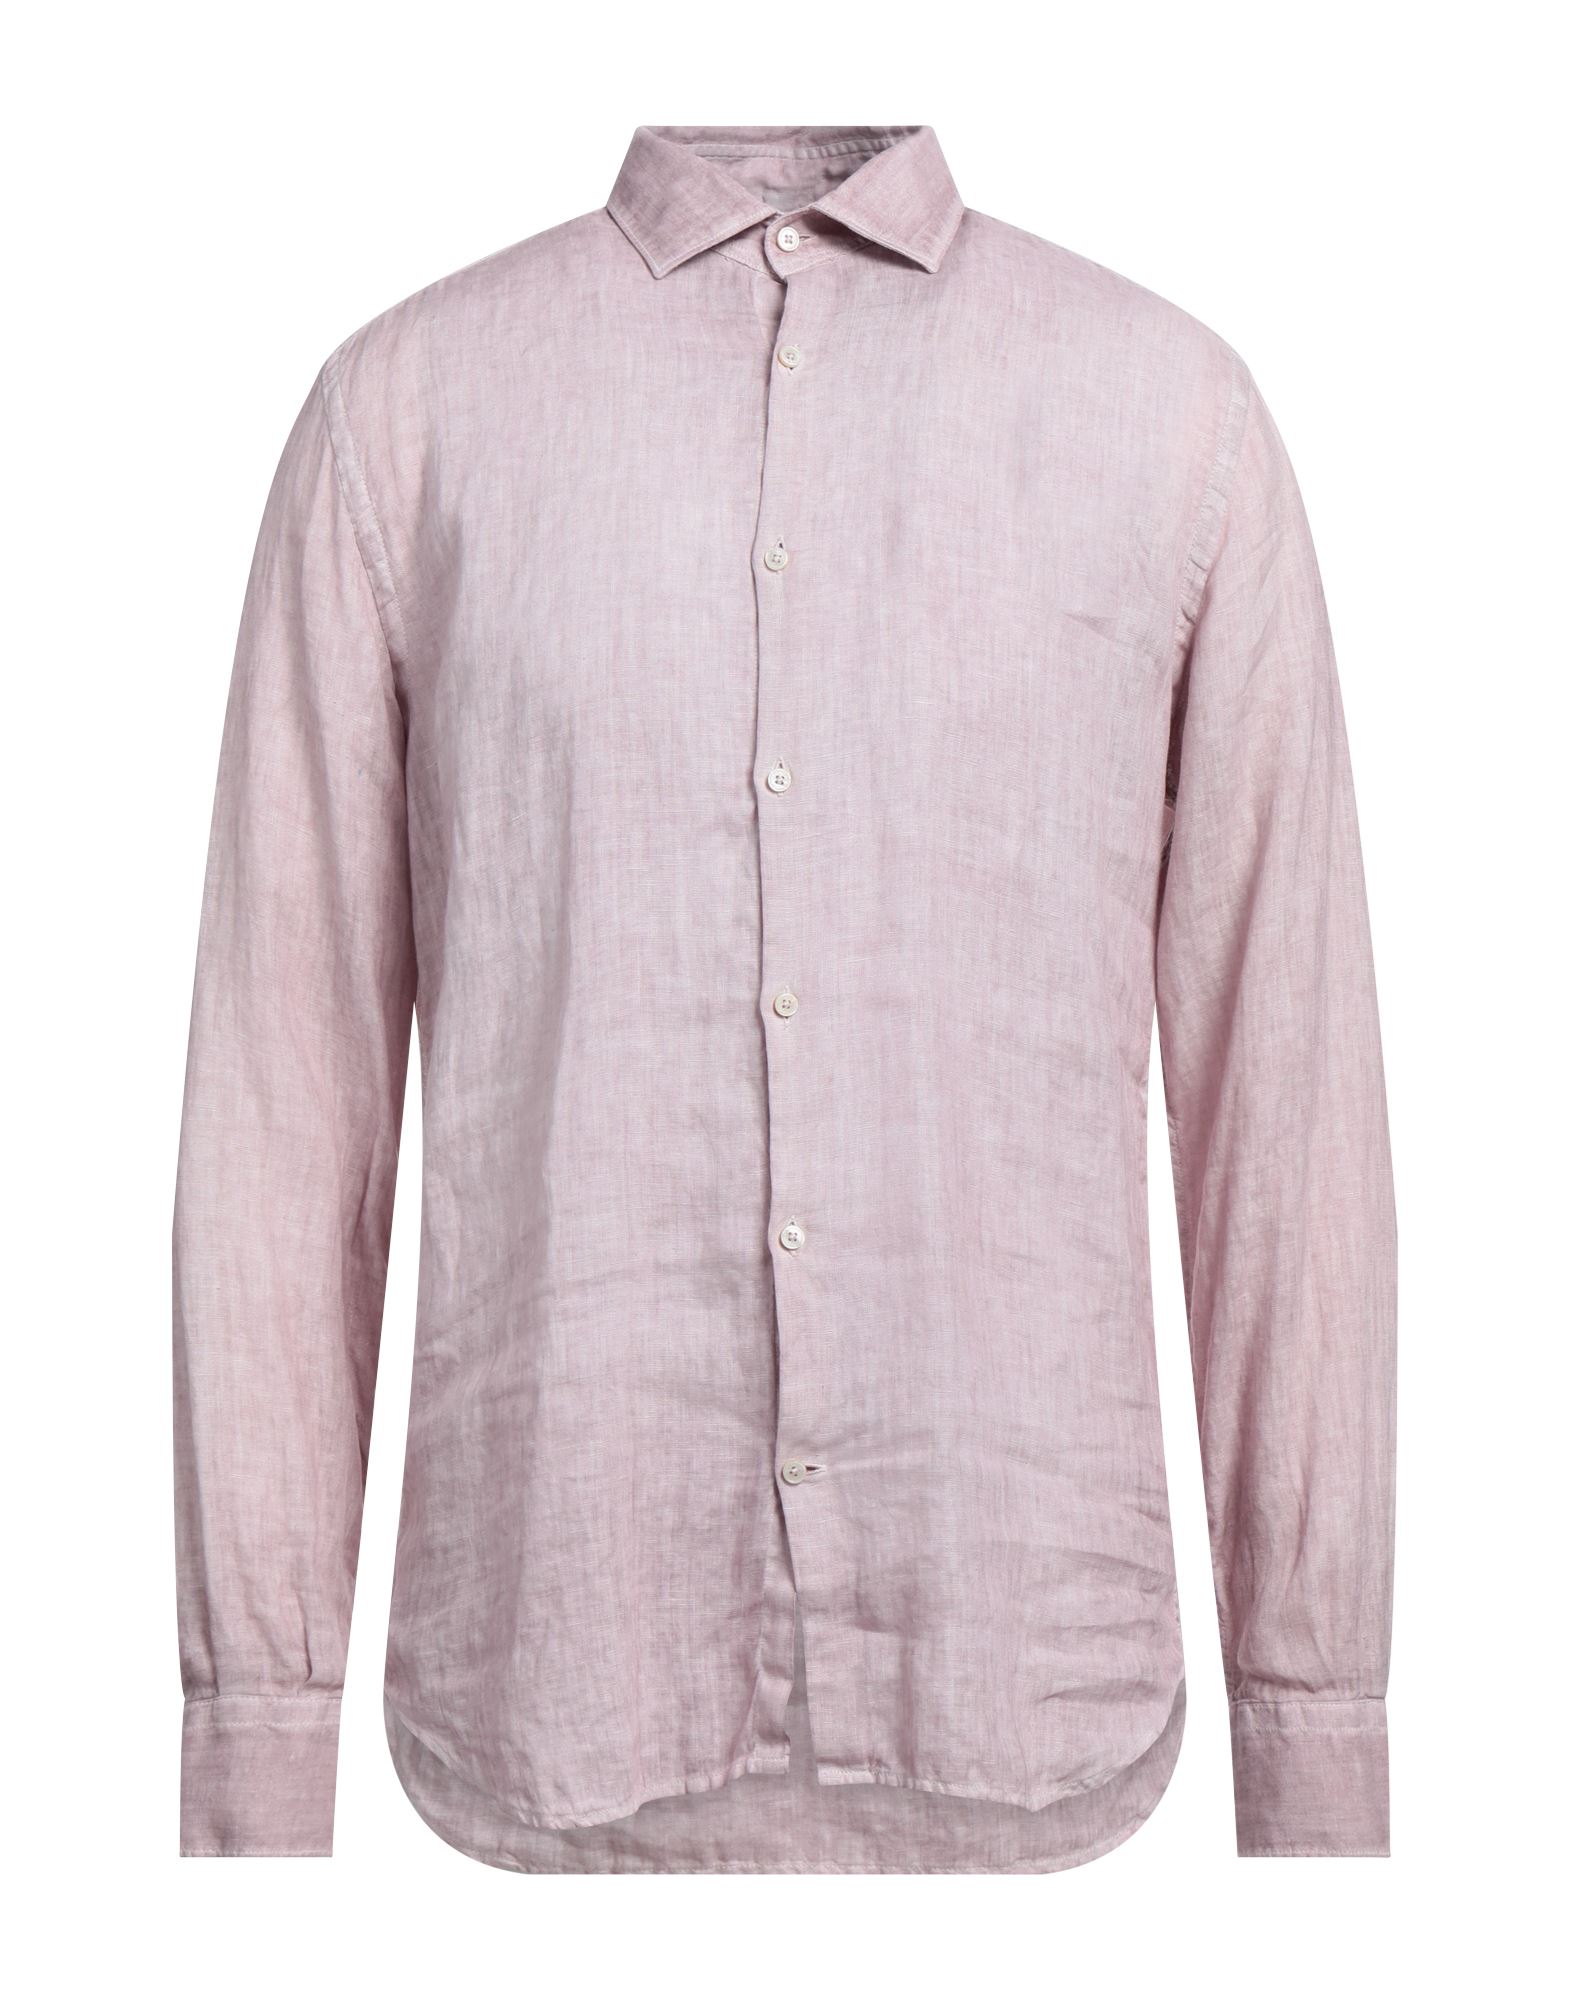 Brooksfield Shirts In Pastel Pink